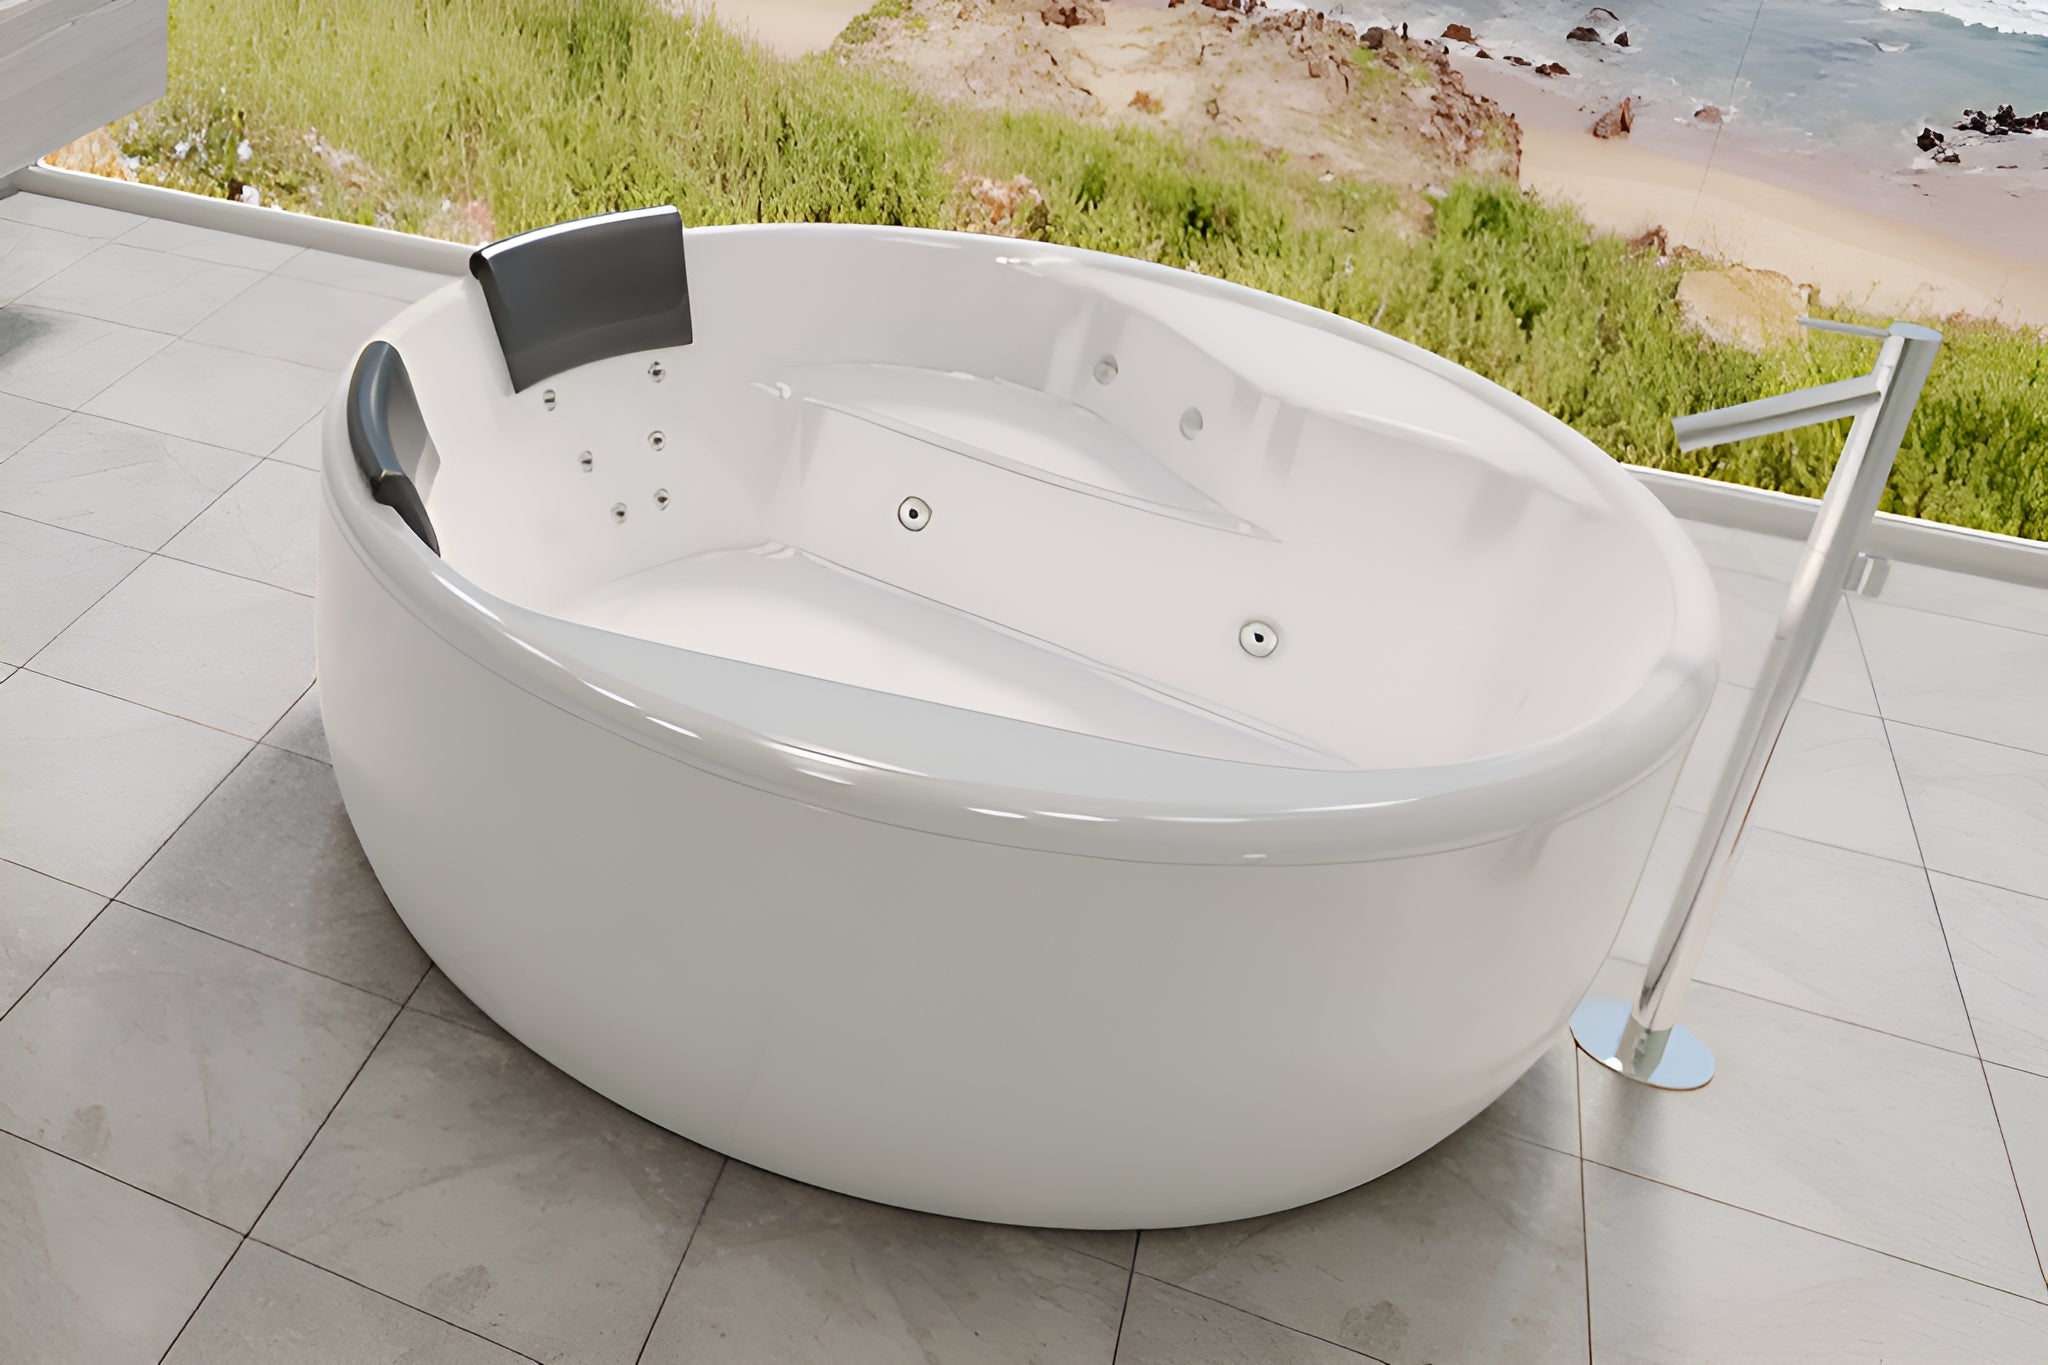 DECINA ORION FREESTANDING DOLCE VITA SPA BATHTUB GLOSS WHITE 1570MM WITH 16-JETS